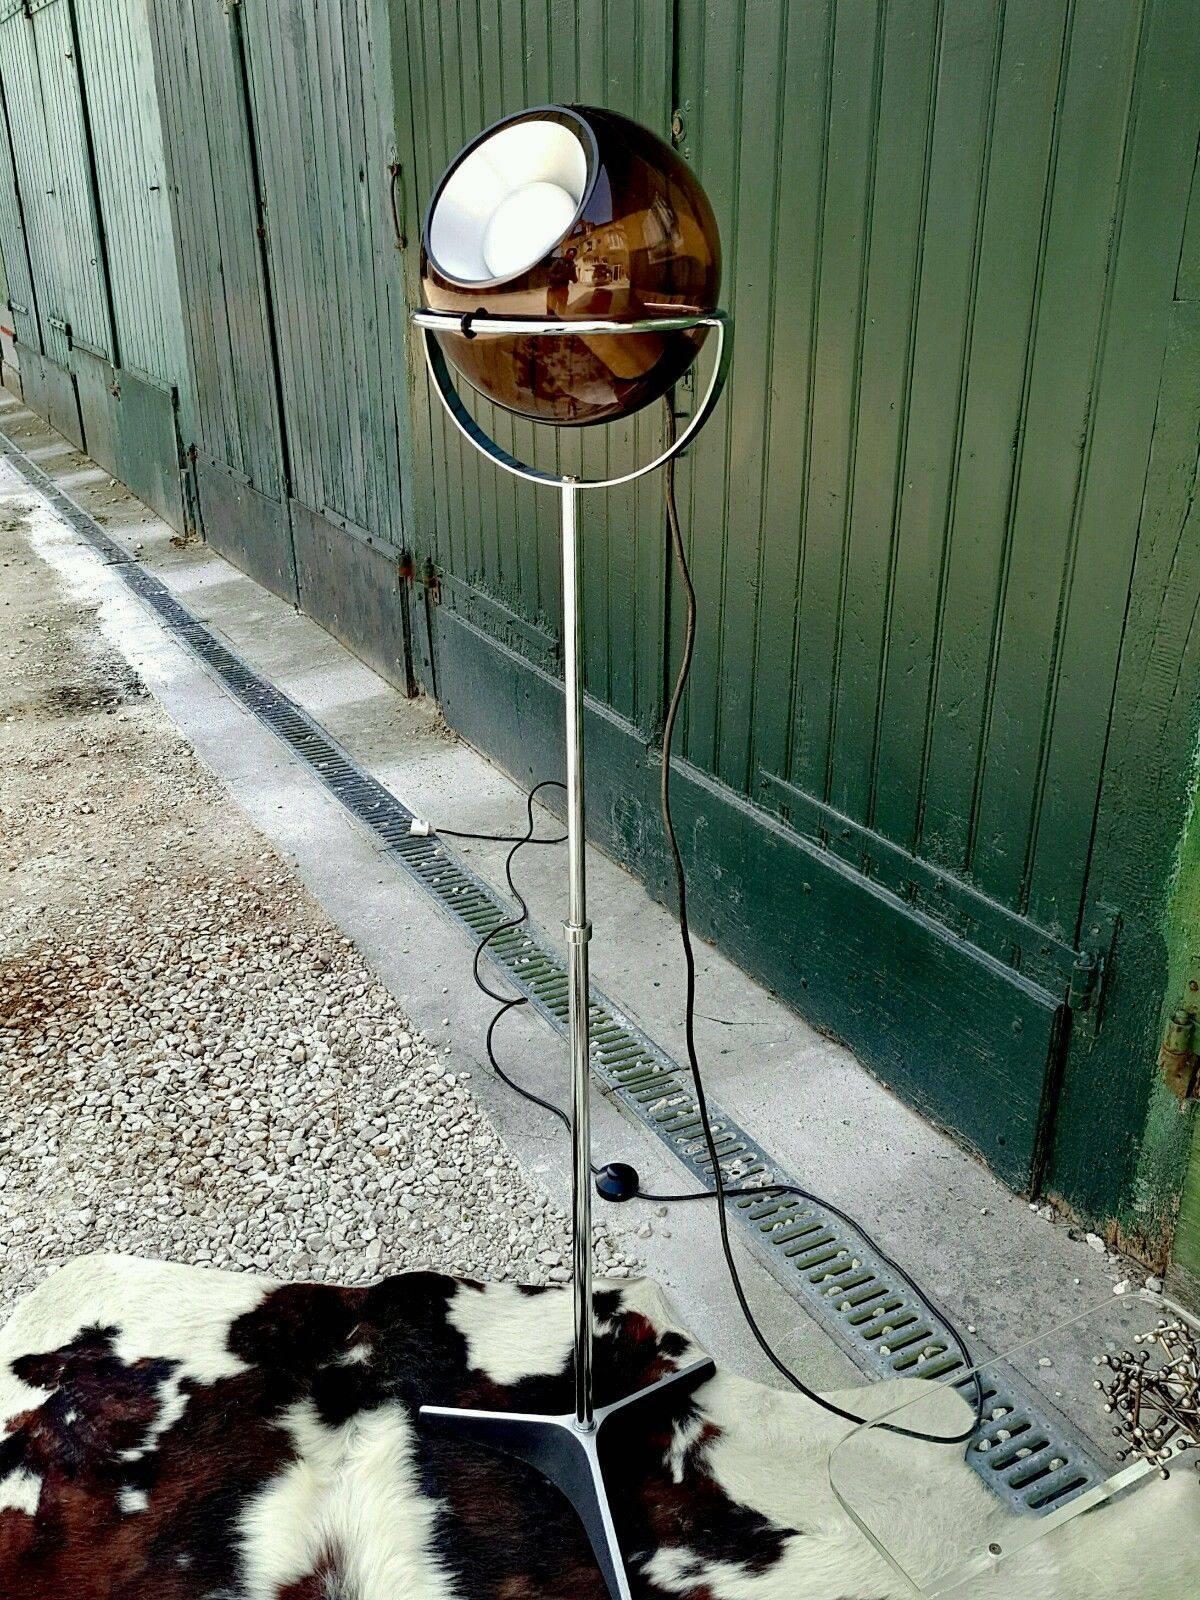 This chromium-plate steel floor lamp has a pivoting smoked glass globe on a height adjustable tripod foot. It is a design of Frank Ligtelijn for Raak Amsterdam in 1961. The glass sphere can be lifted from the ring and turned in any direction. The